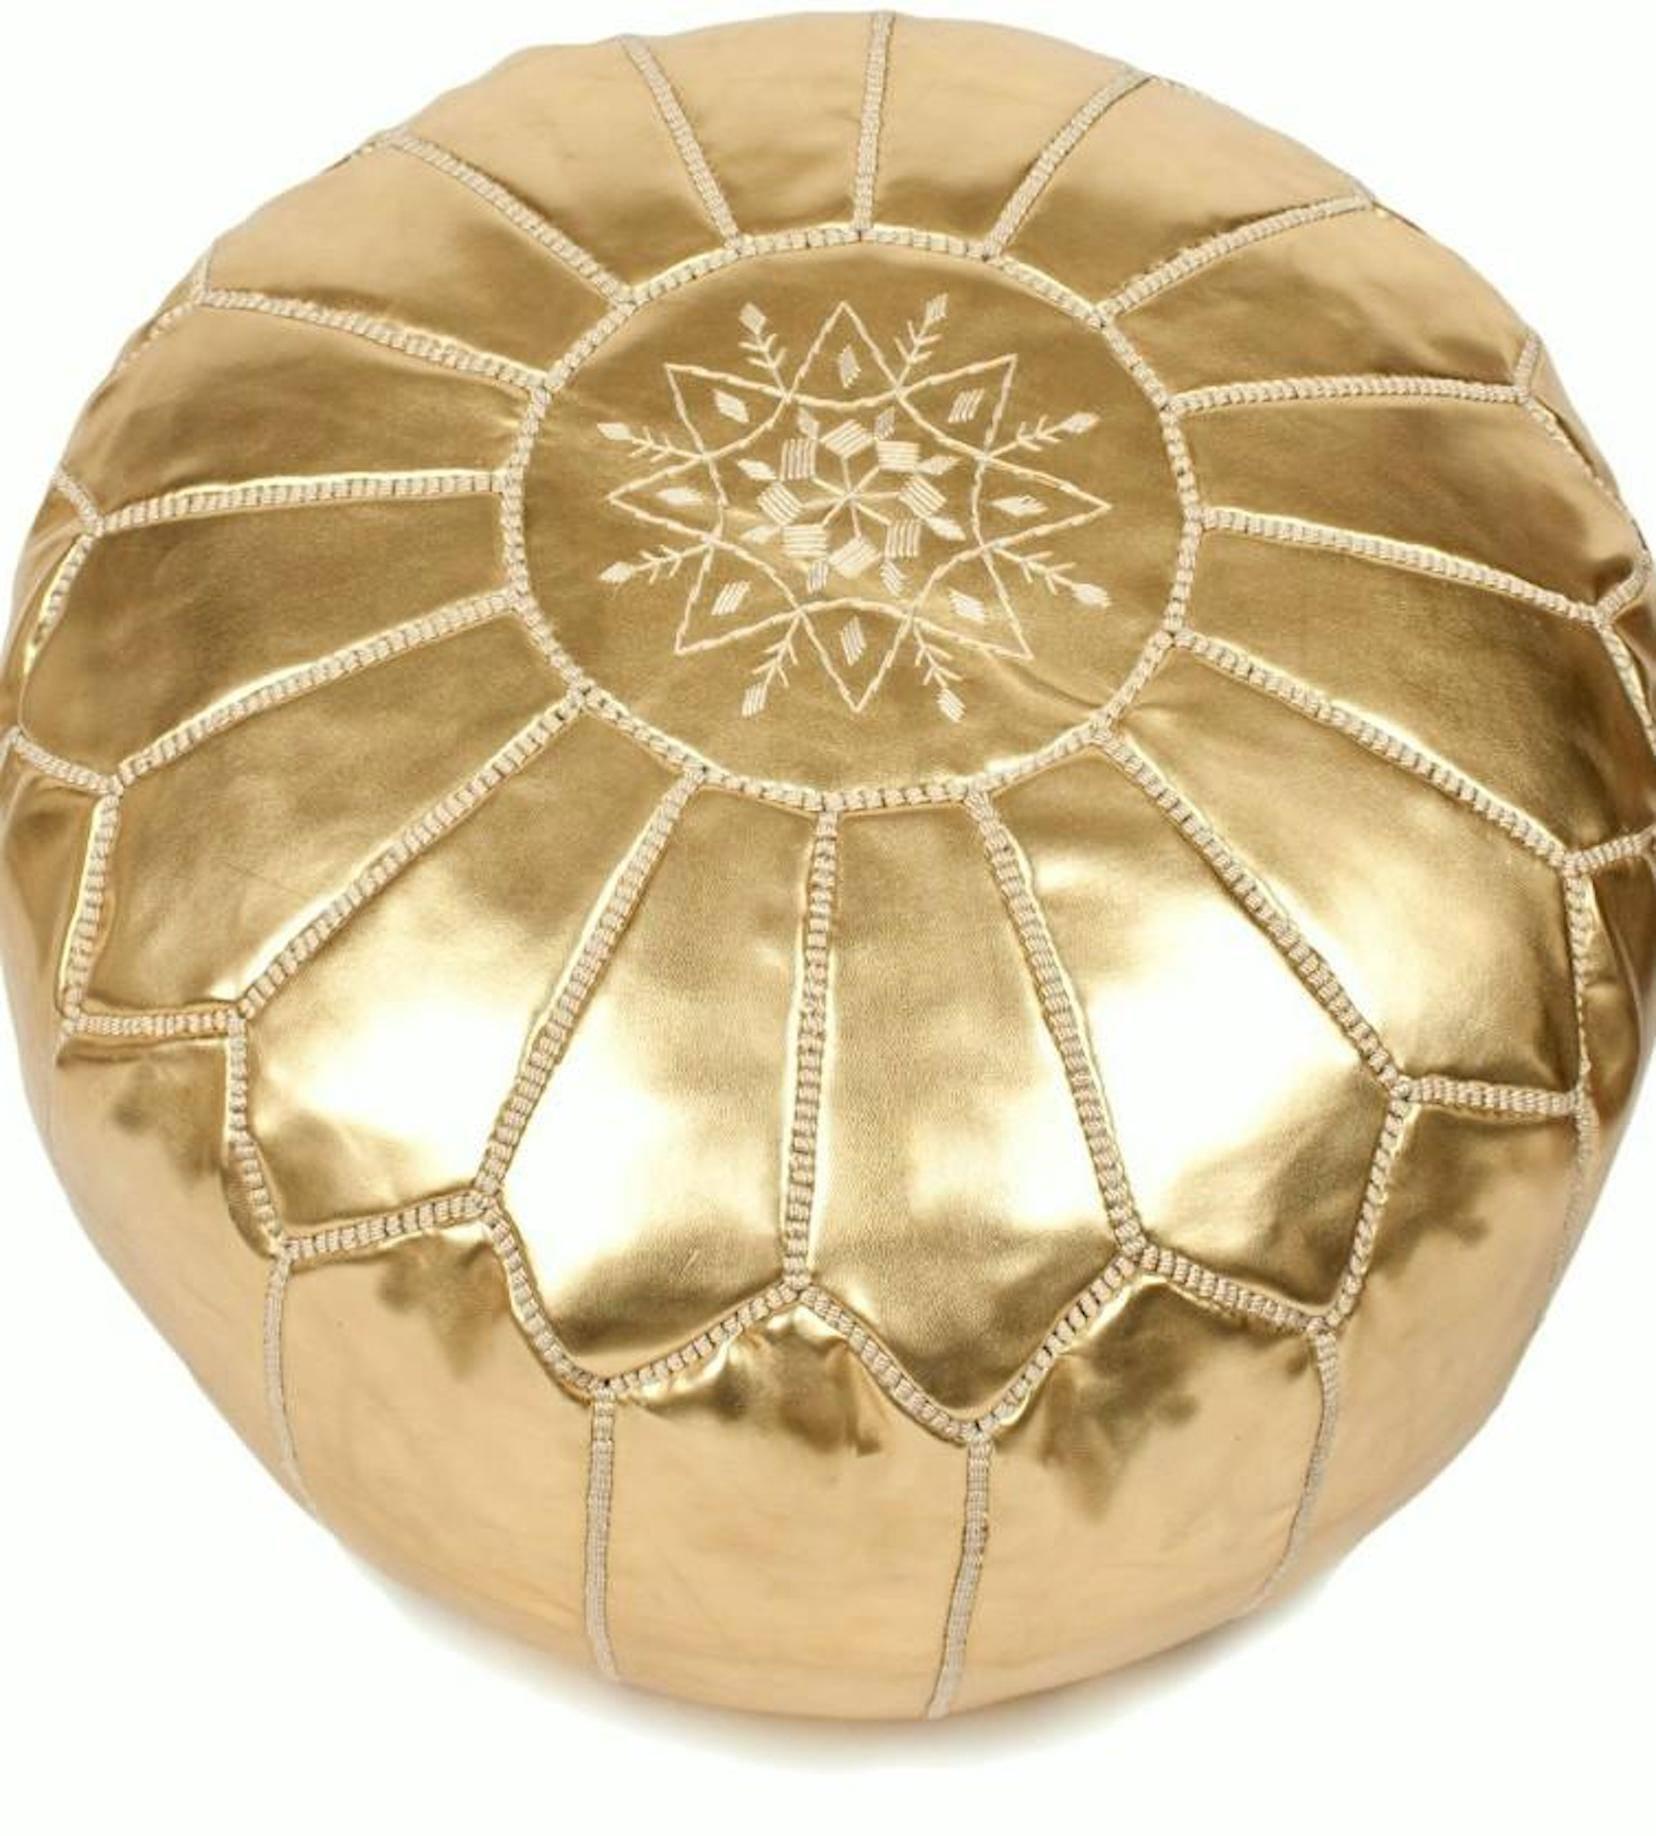 Moroccan gold color round pouf hand tooled and embroidered in Marrakesh.
Beautiful geometrical designs are hand-stitched on this Moroccan stool by expert Artisan.
Use these round handcrafted poufs as ottoman or accent side table, they will add the